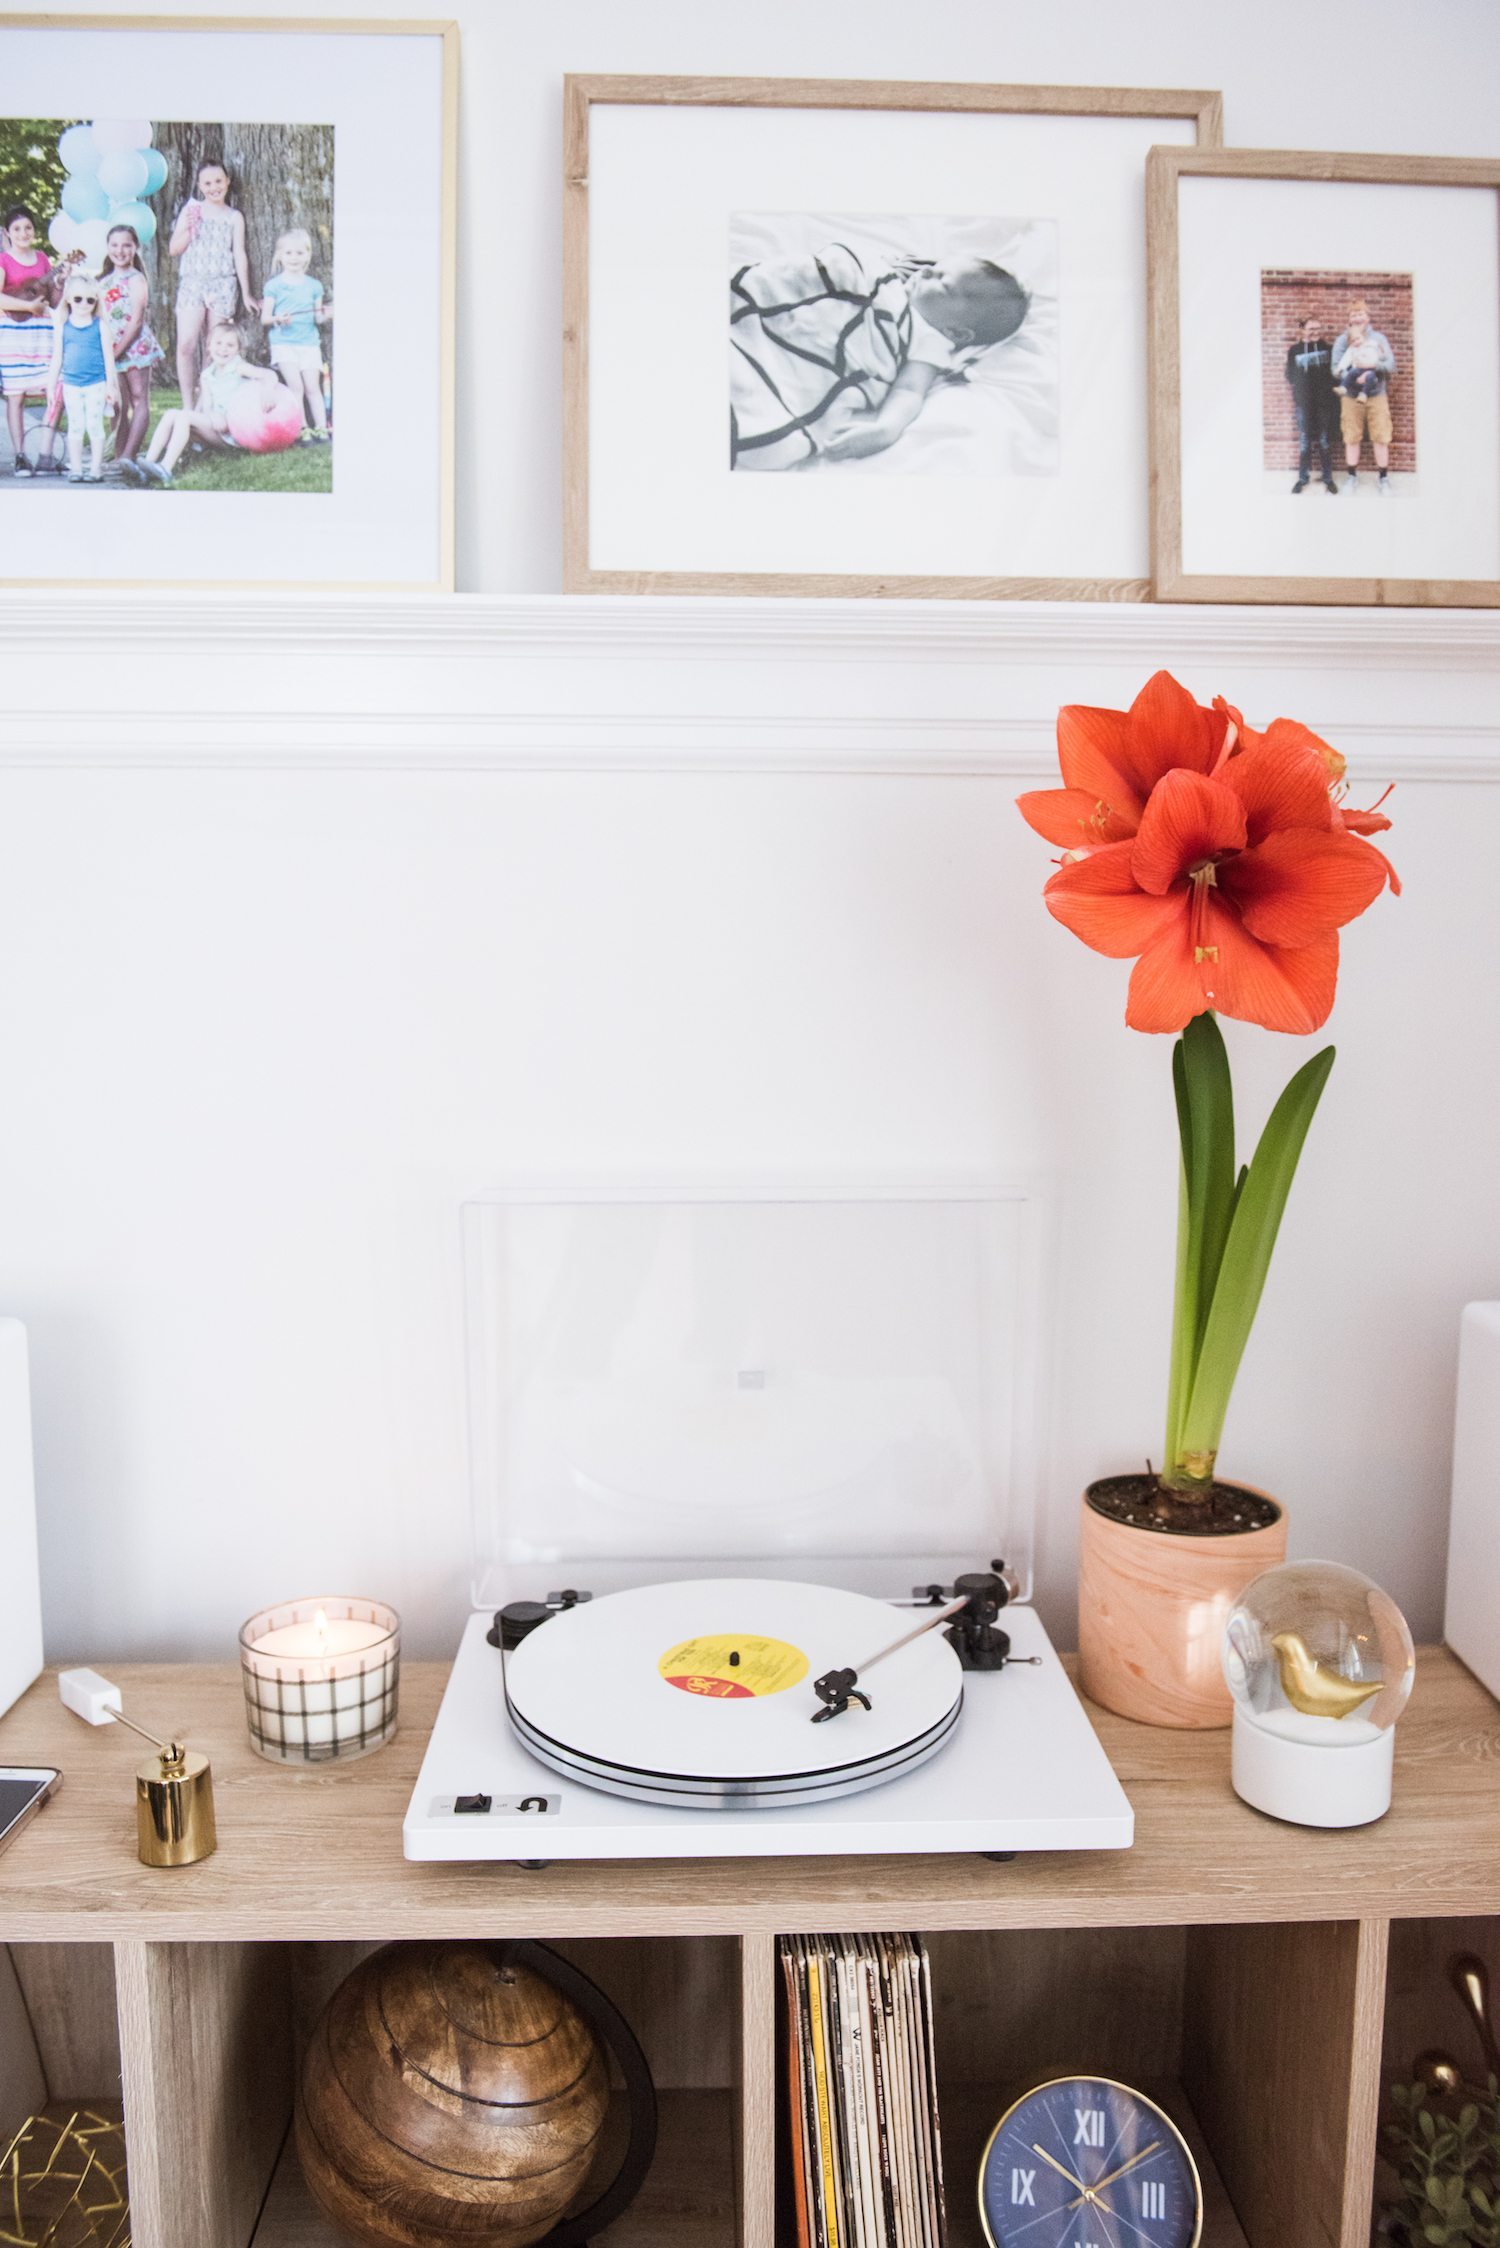 U-Turn Audio Orbit Review | Home decor ideas, entertaining tips, party ideas, party recipes and more from @cydconverse